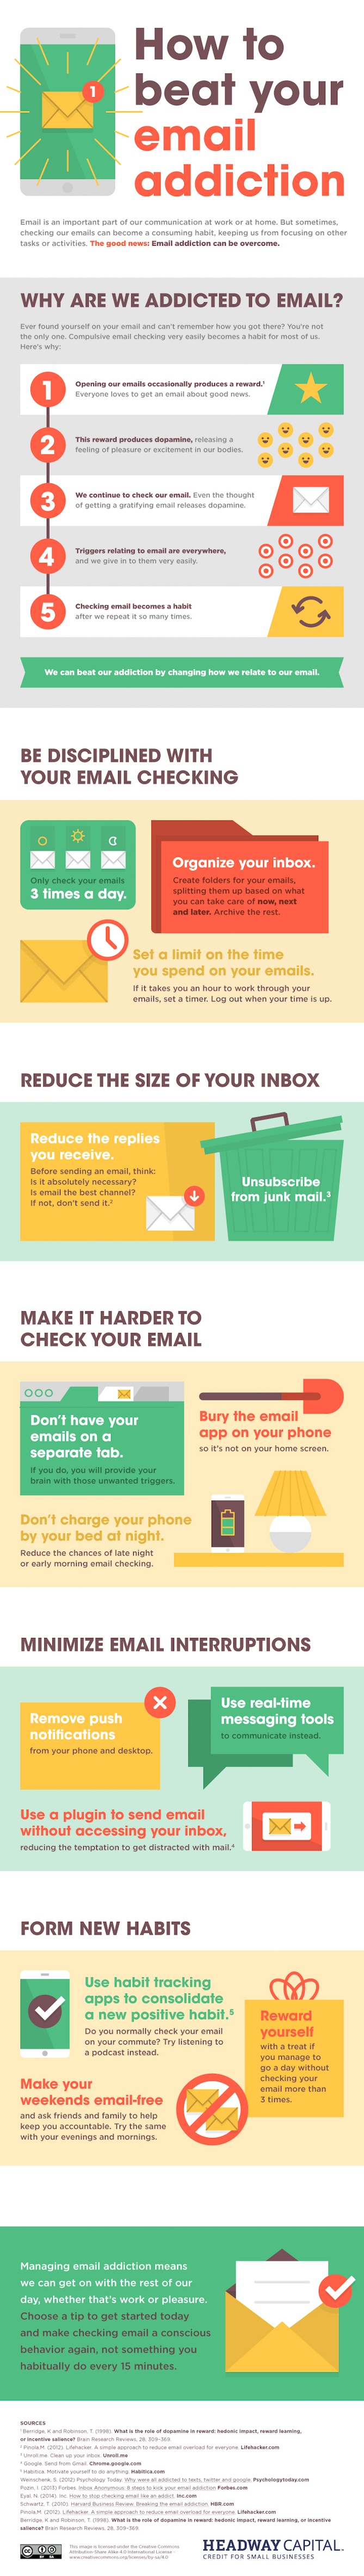 How-to-beat-your-email-addiction.jpg